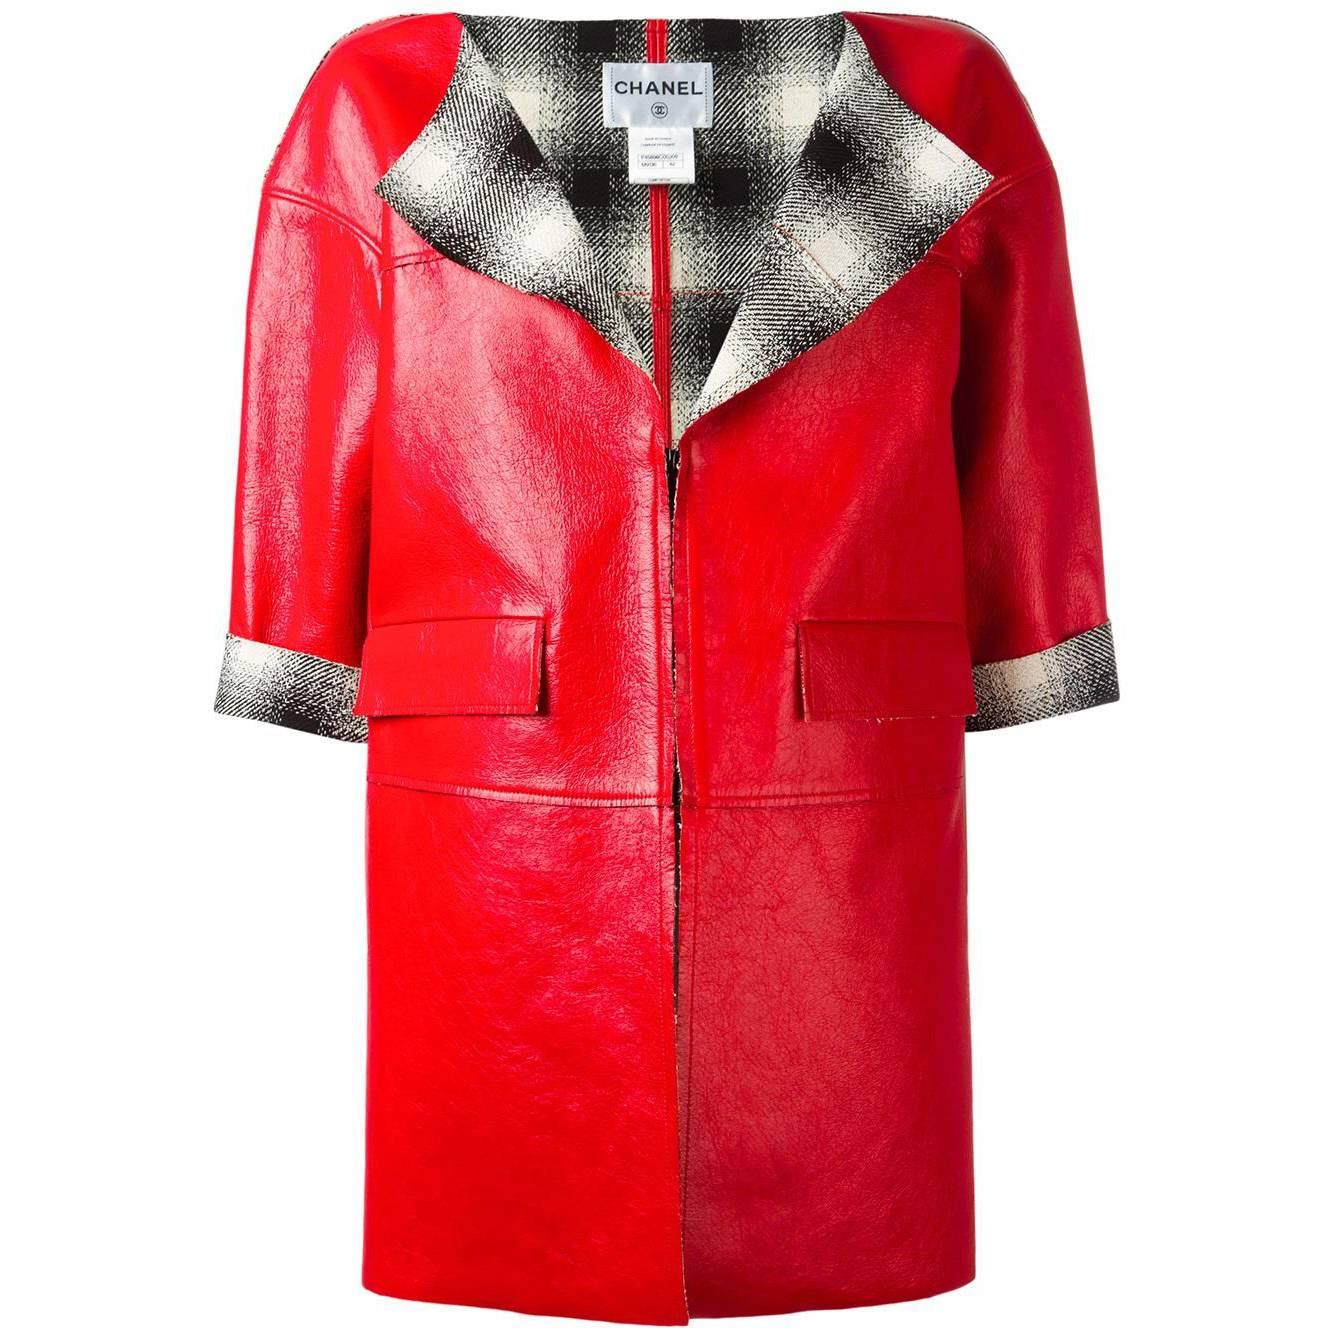 Chanel Red Patent Leather Coat Spring/Summer 2013